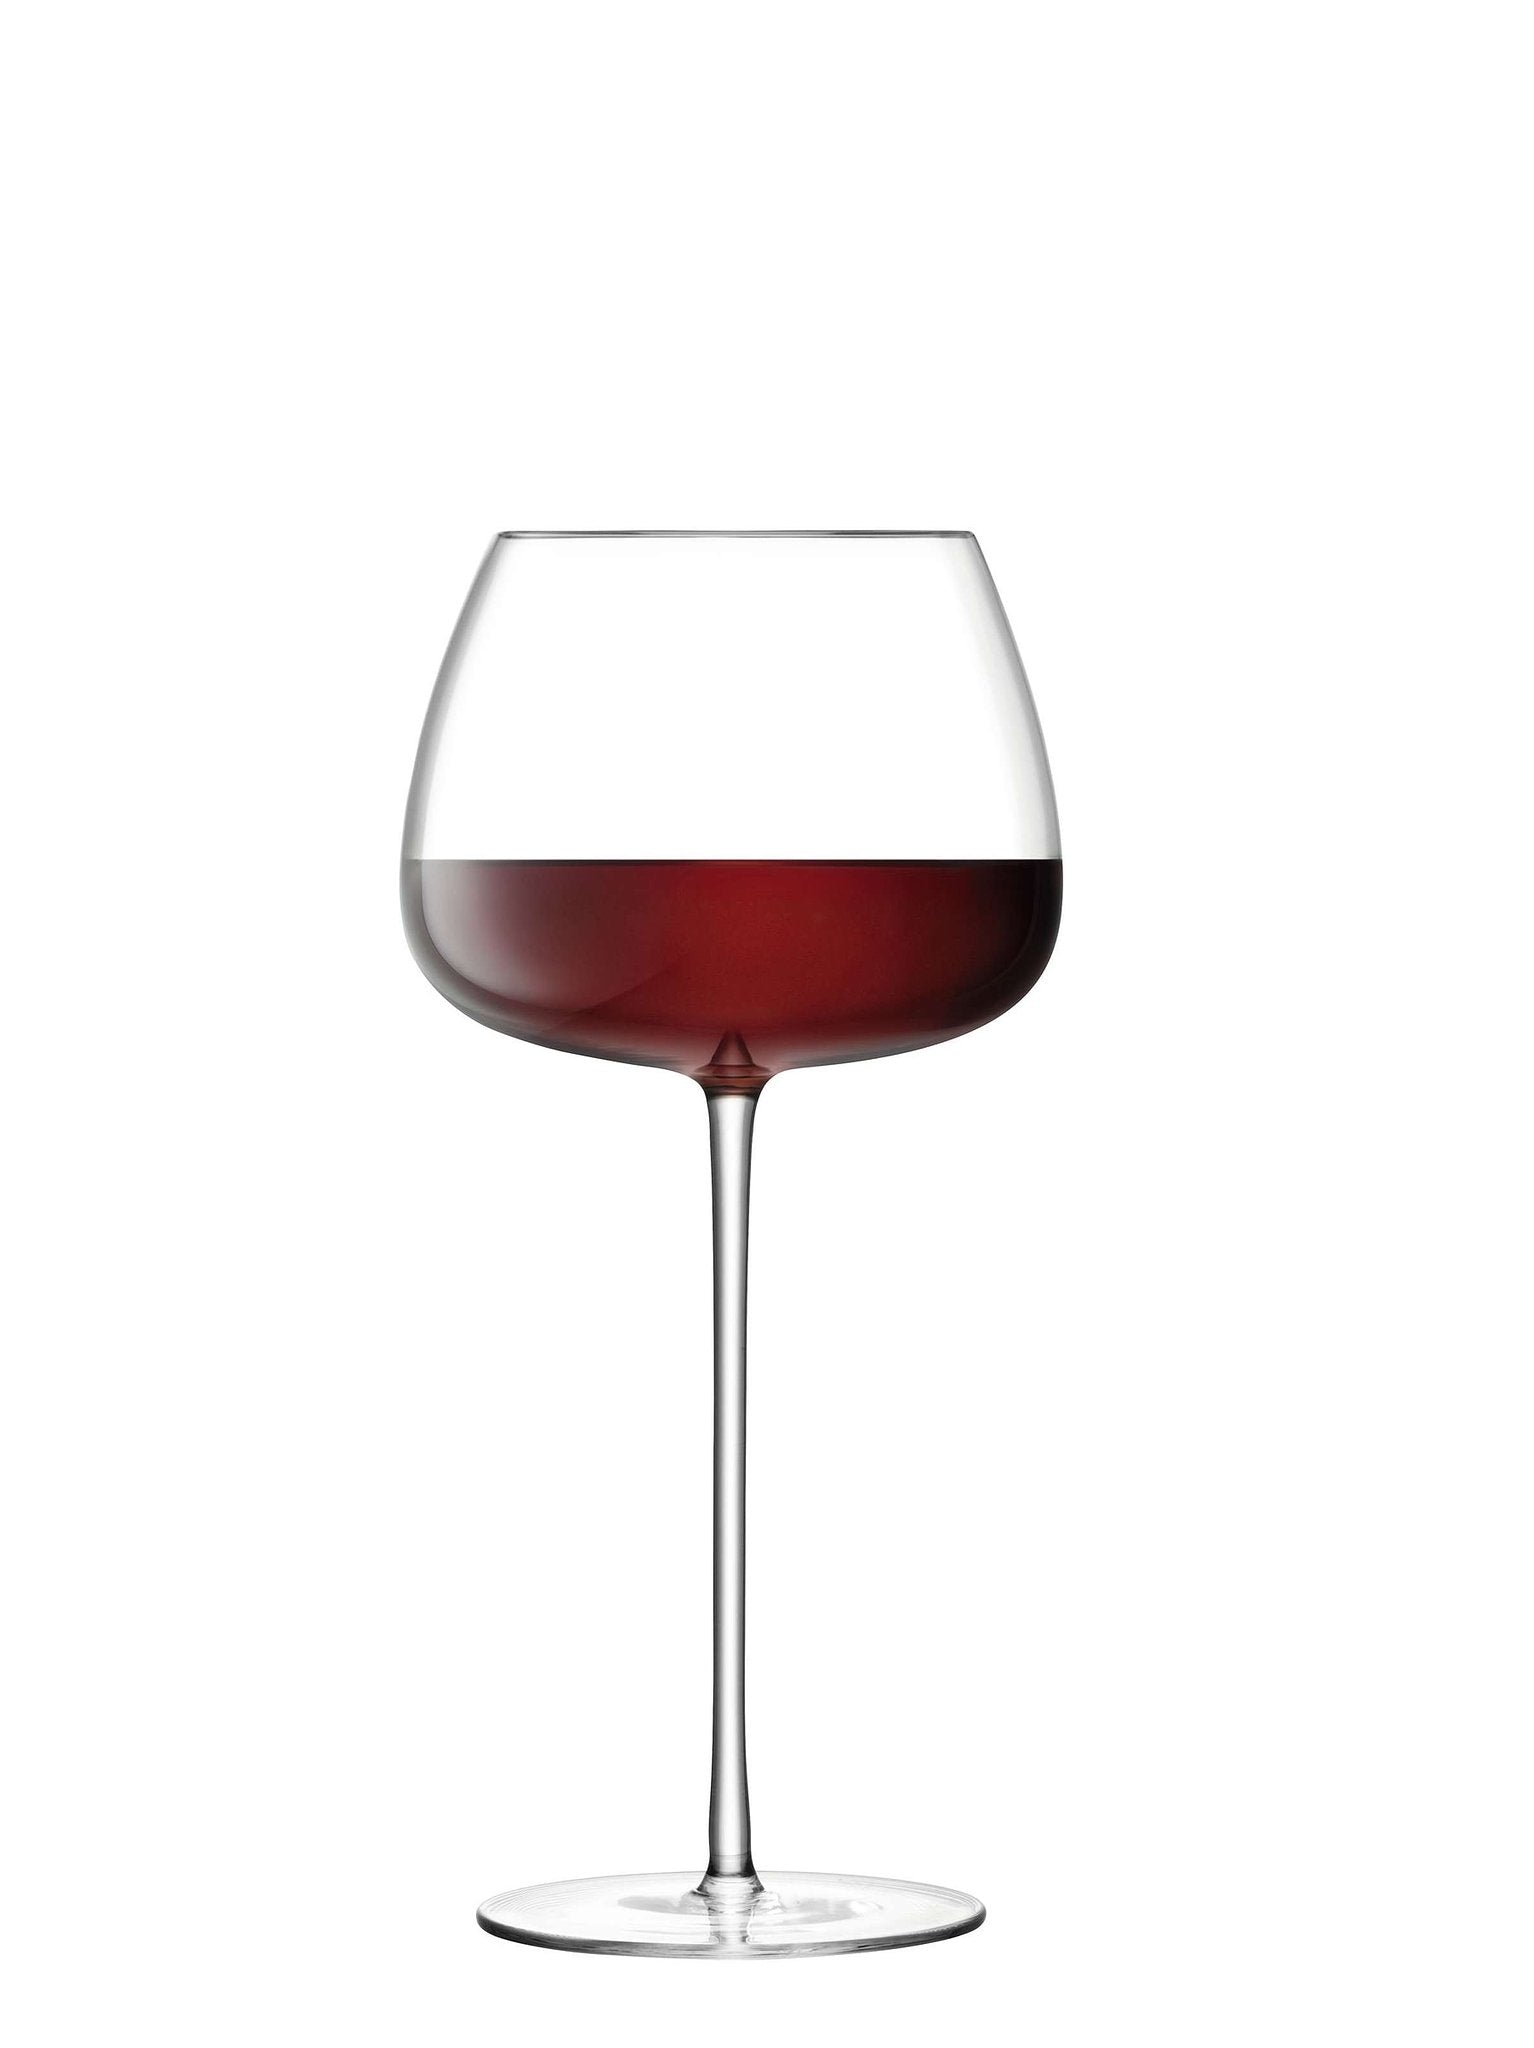 L.S.A. Wine Culture Red Wine Glass 590 ml Set of 2 Pieces